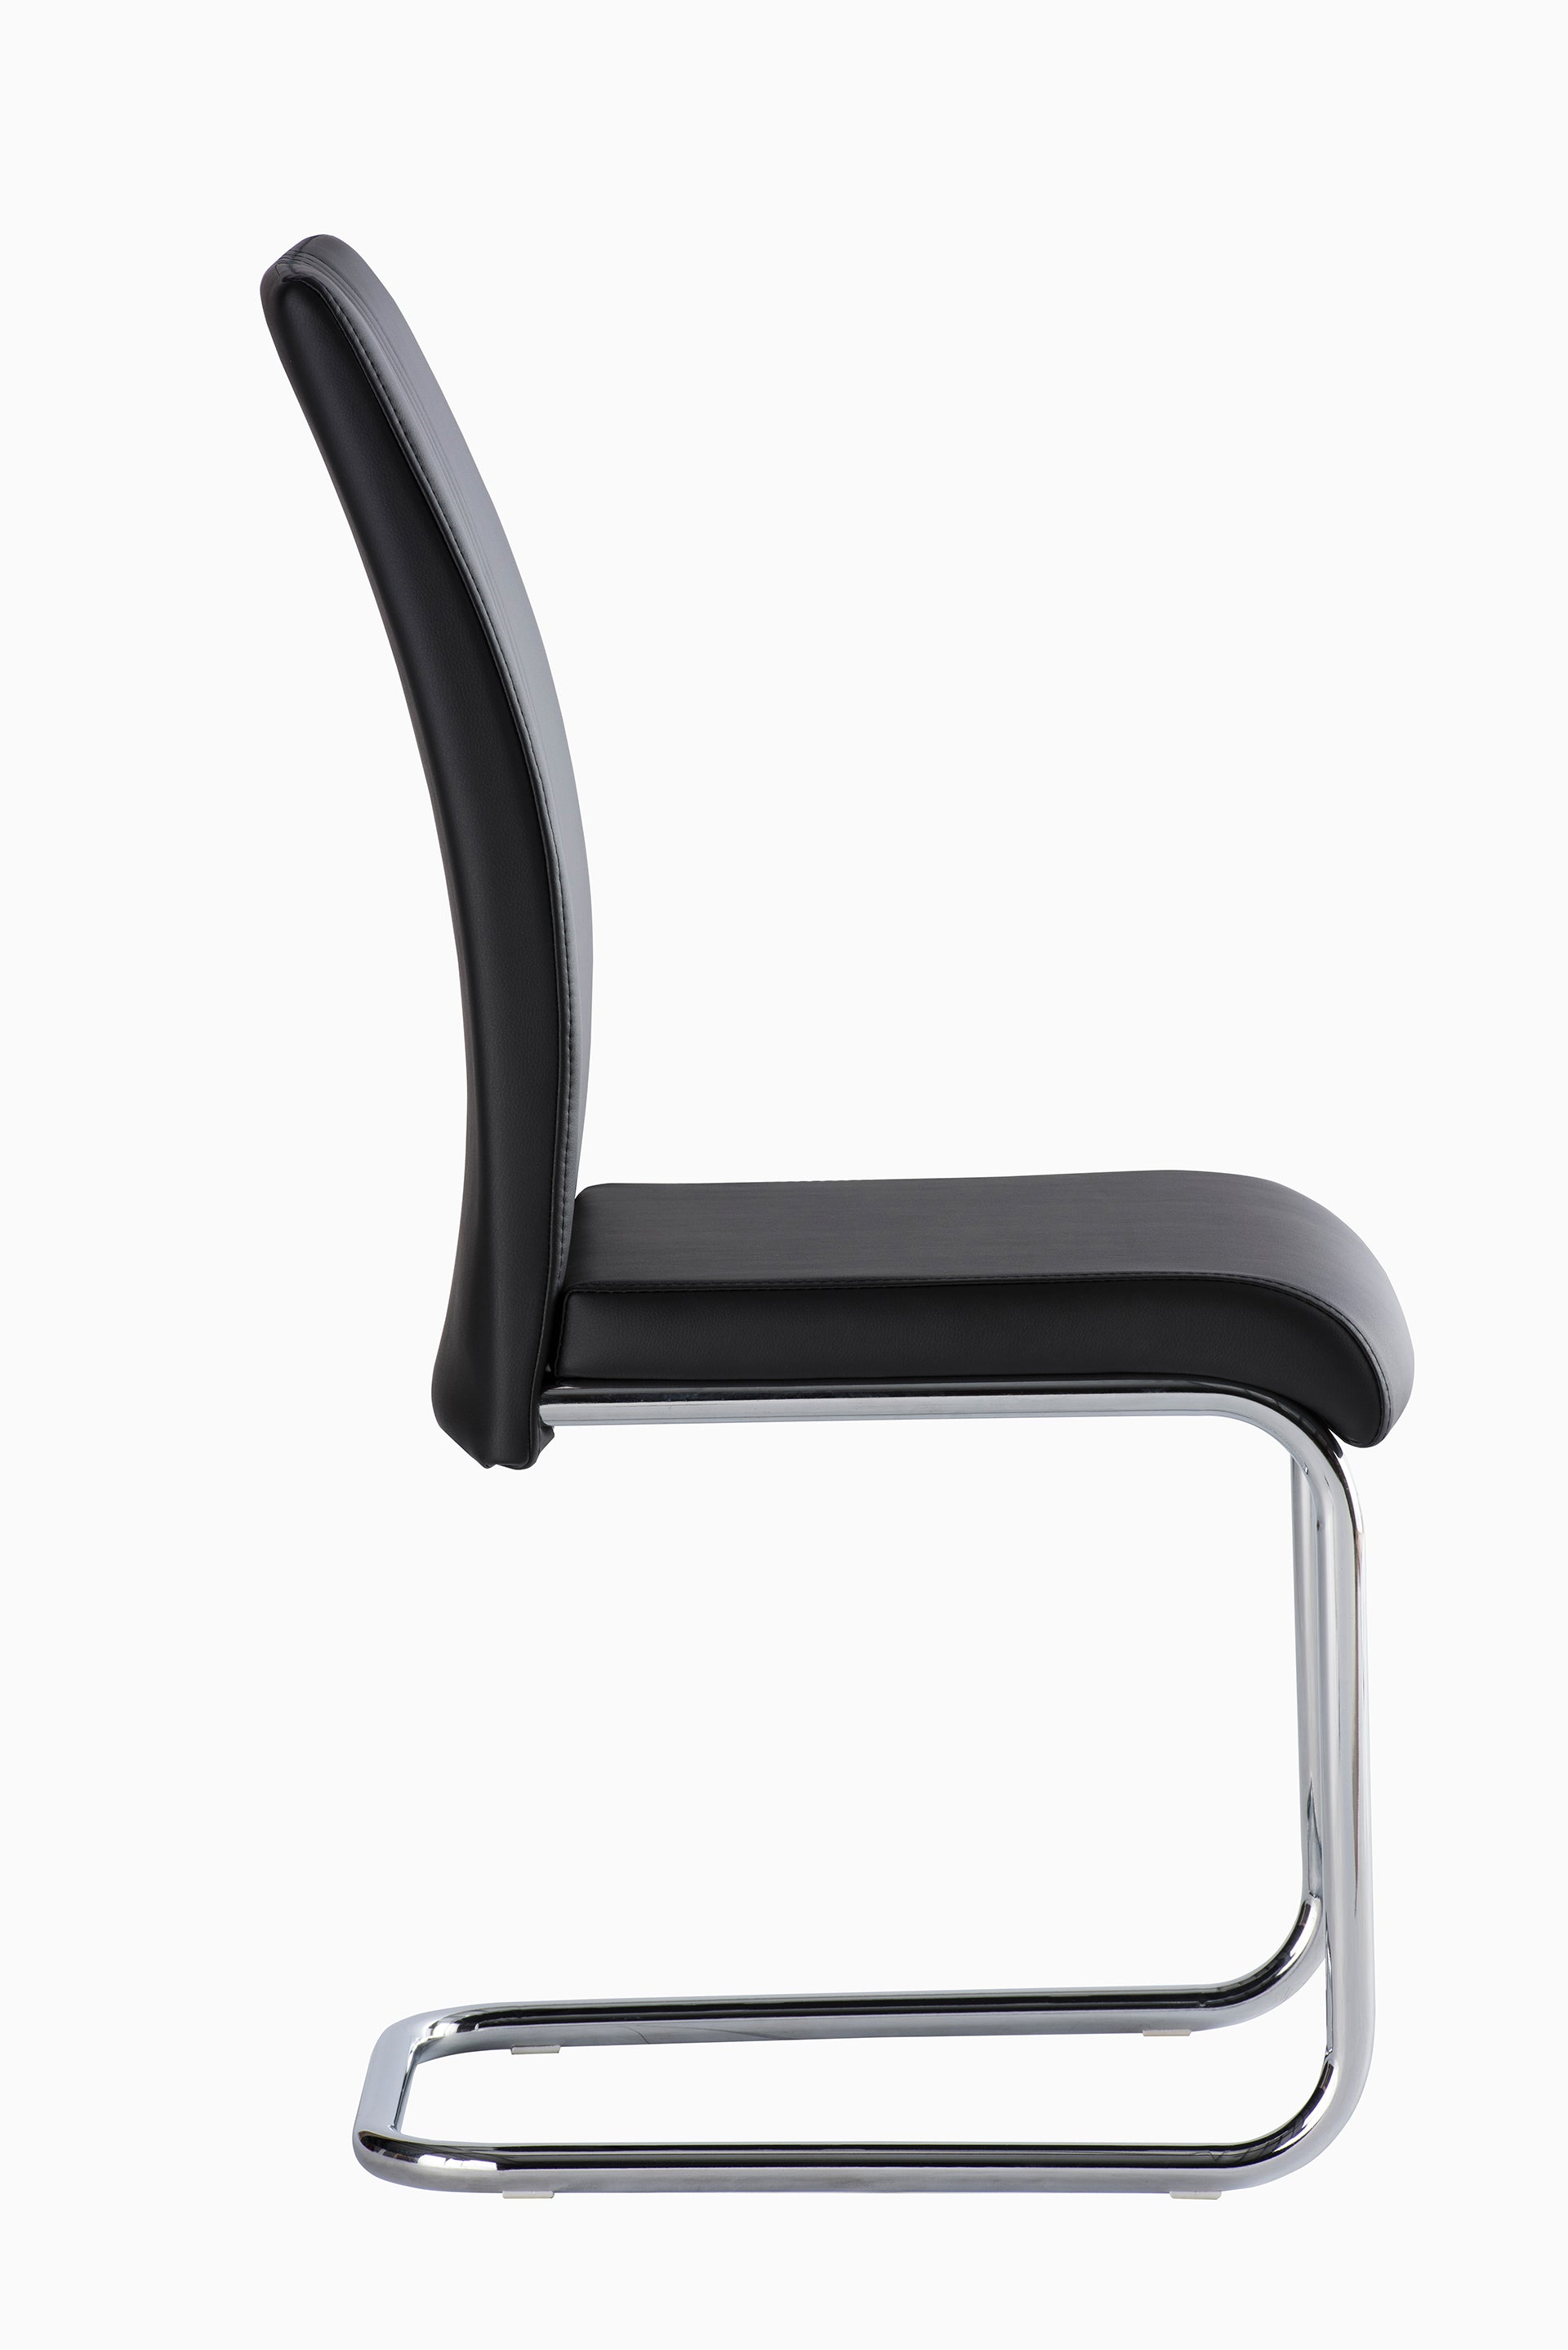 Marshow Pu Cantilever Dining Chair (Pairs)